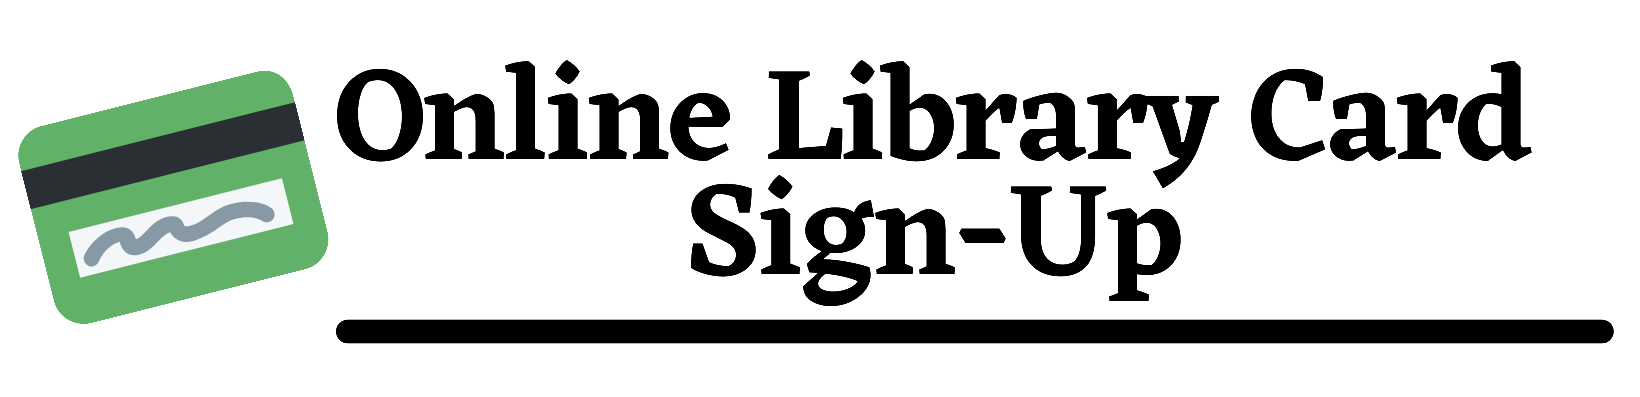 Online Library Card sign-up